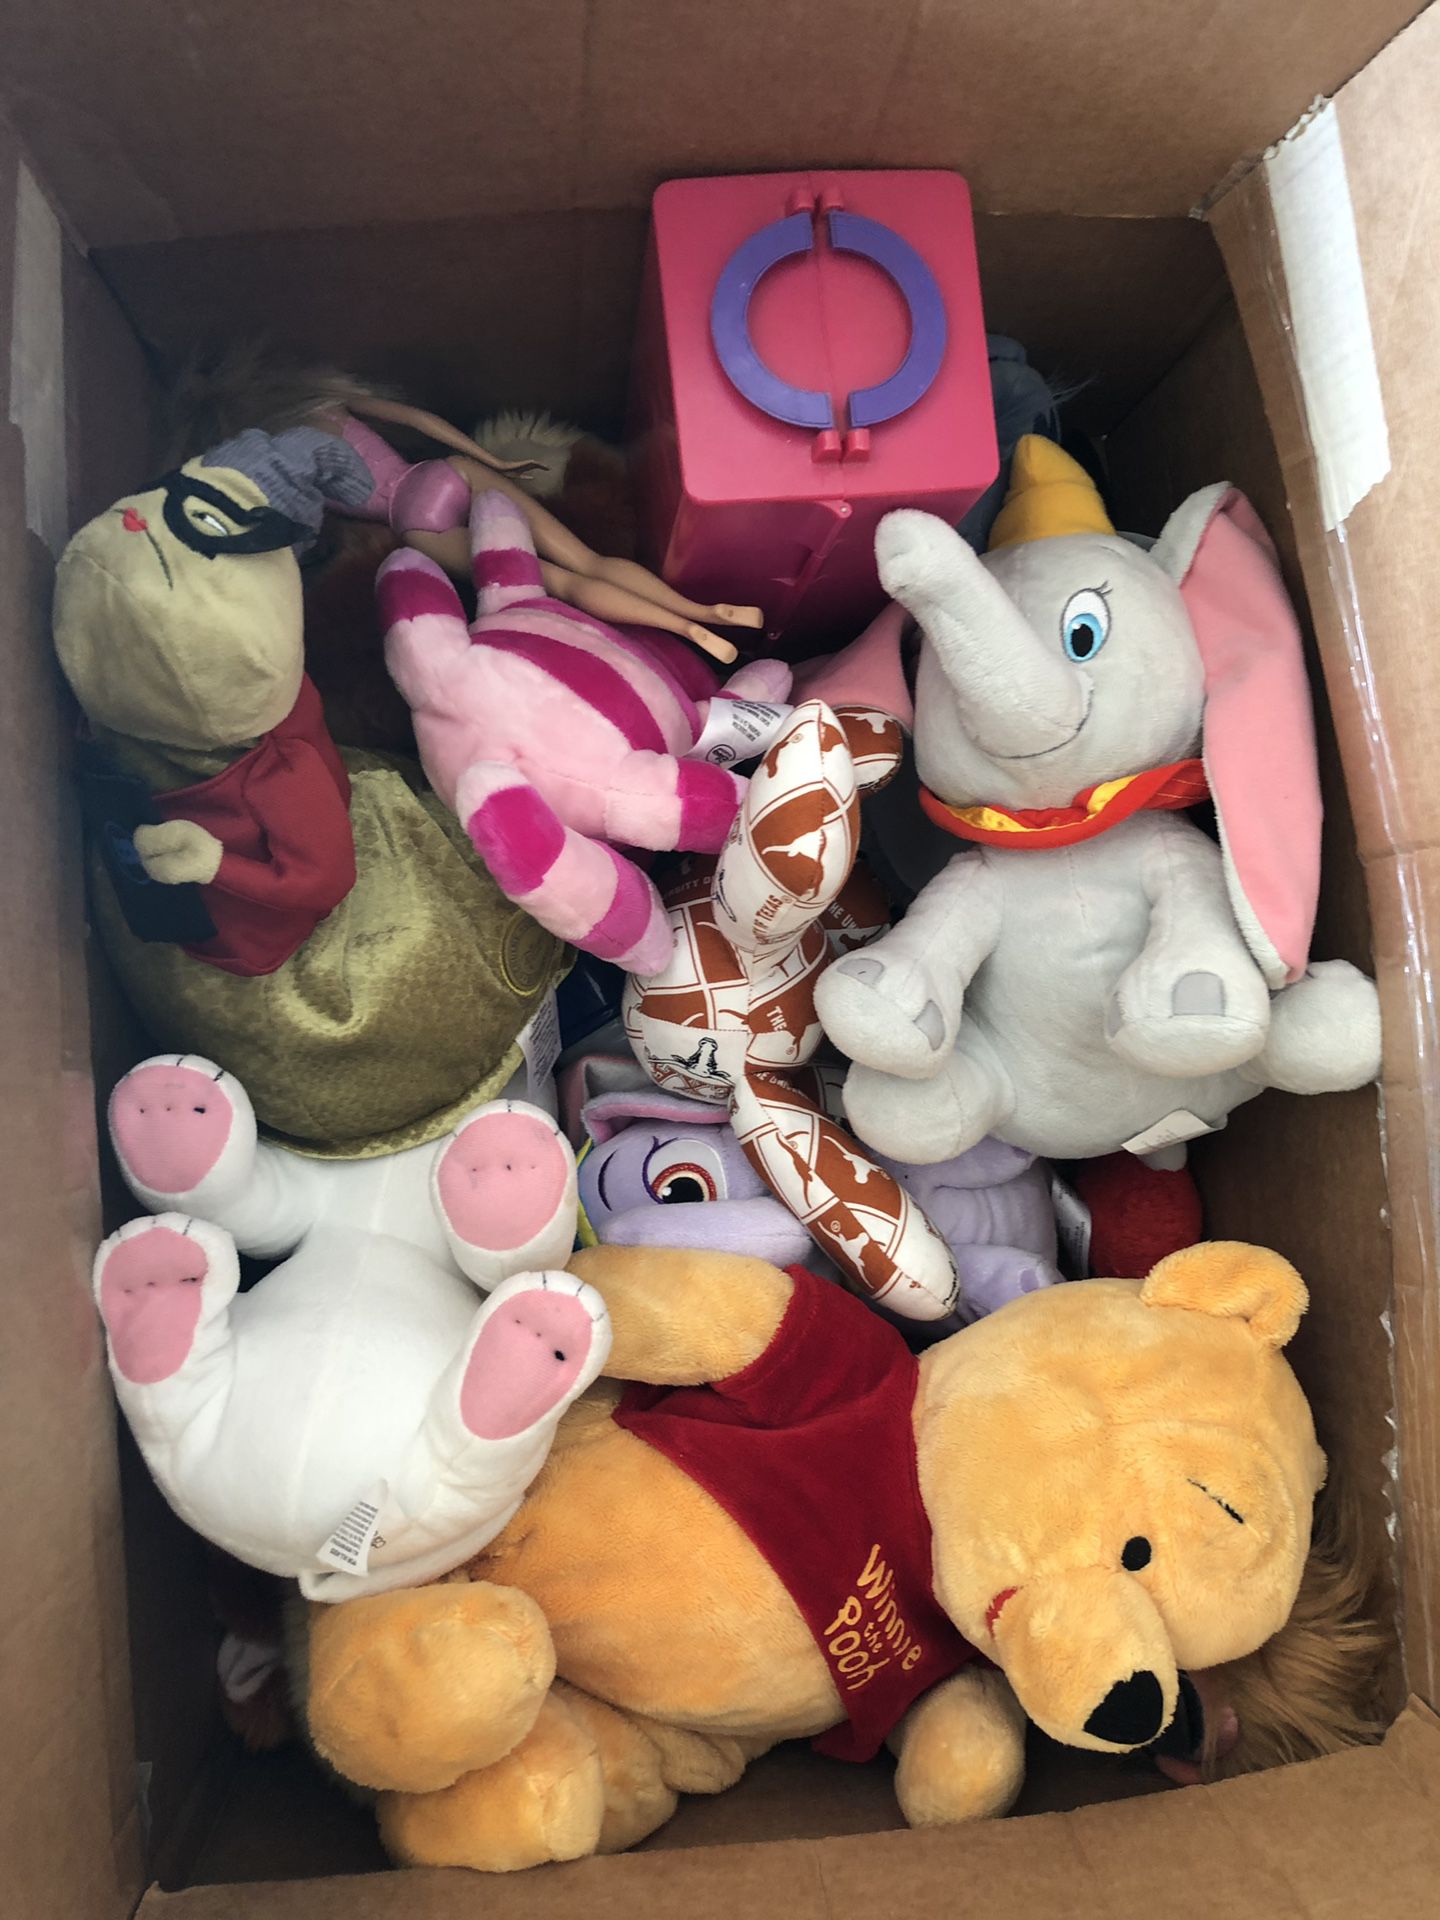 Stuffed animals and other toys